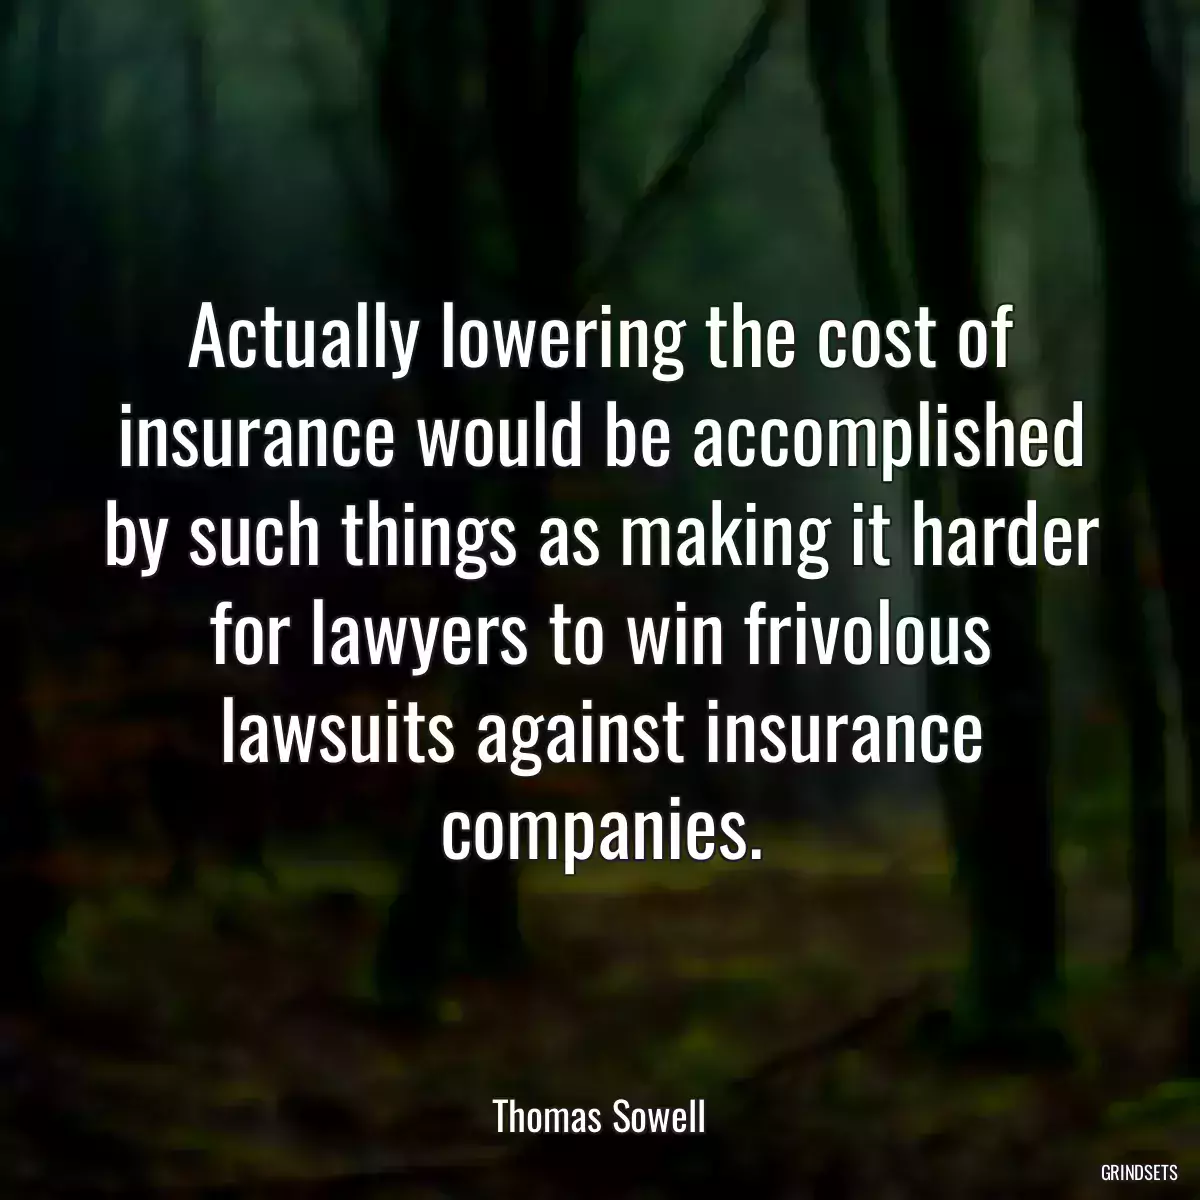 Actually lowering the cost of insurance would be accomplished by such things as making it harder for lawyers to win frivolous lawsuits against insurance companies.